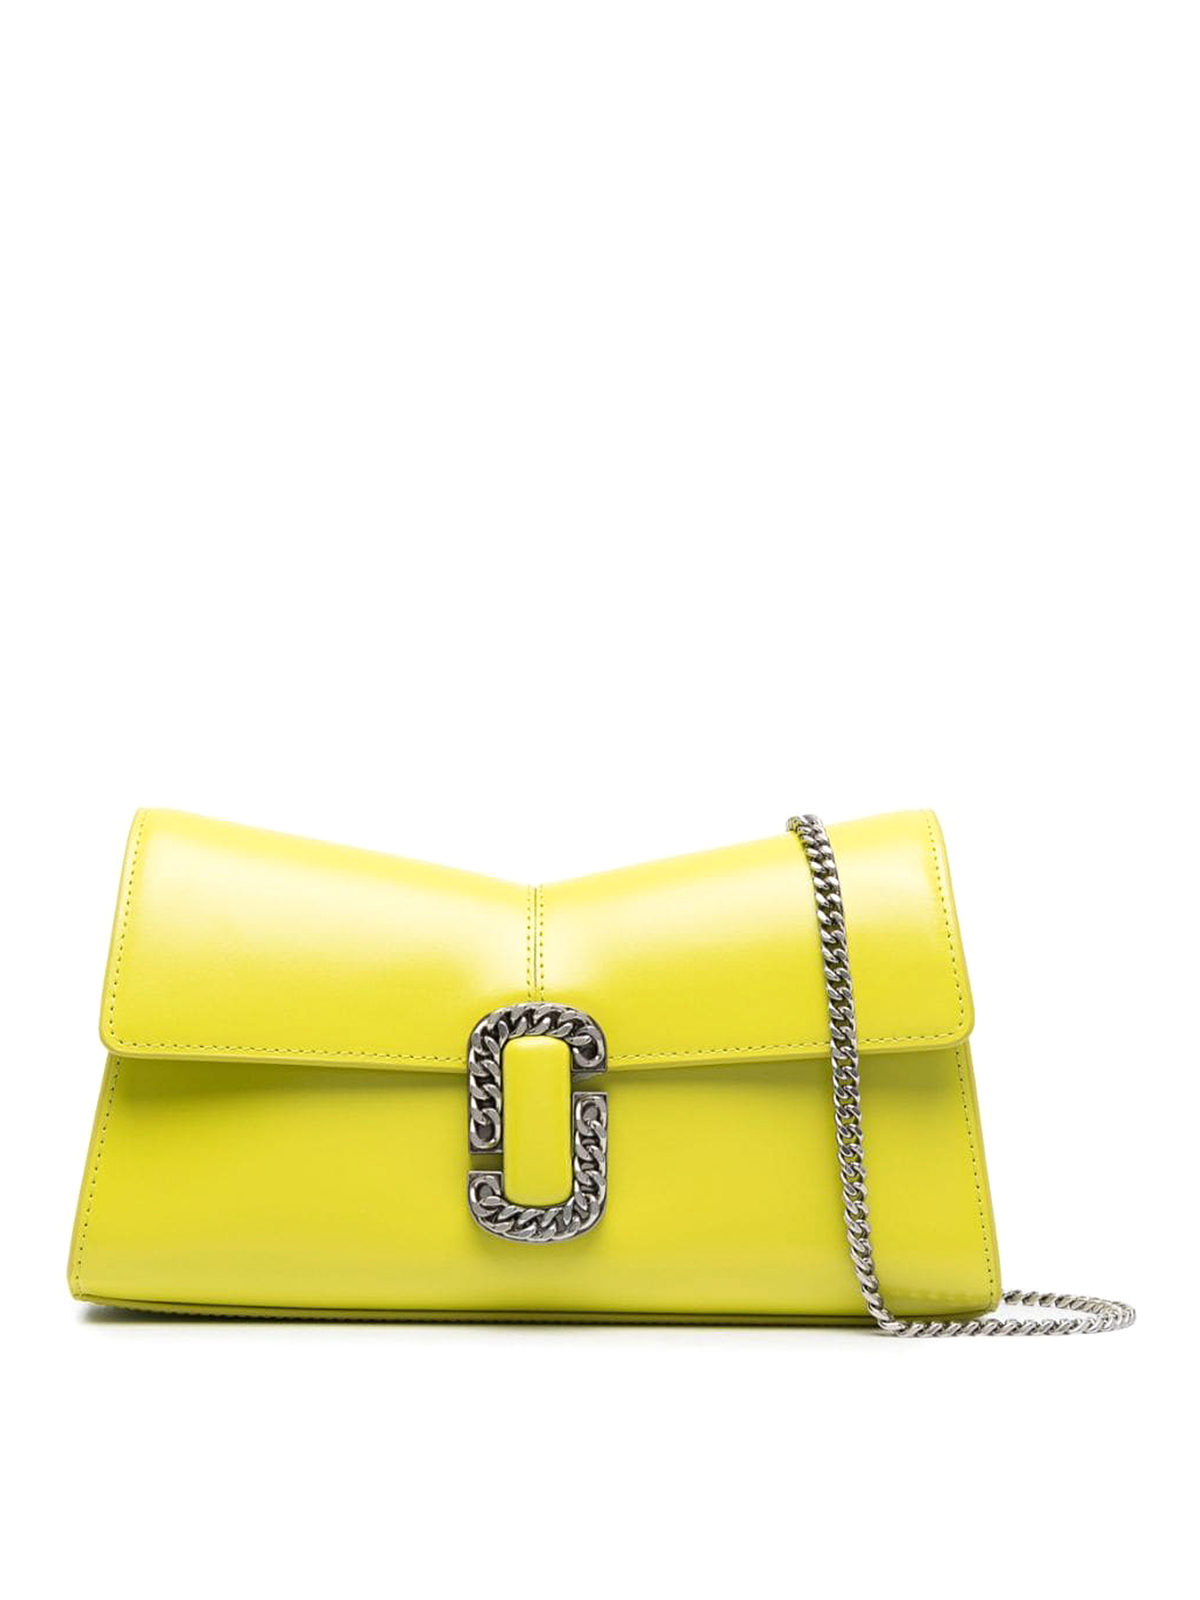 Marc Jacobs The St. Marc Convertible Clutch Bag in Yellow